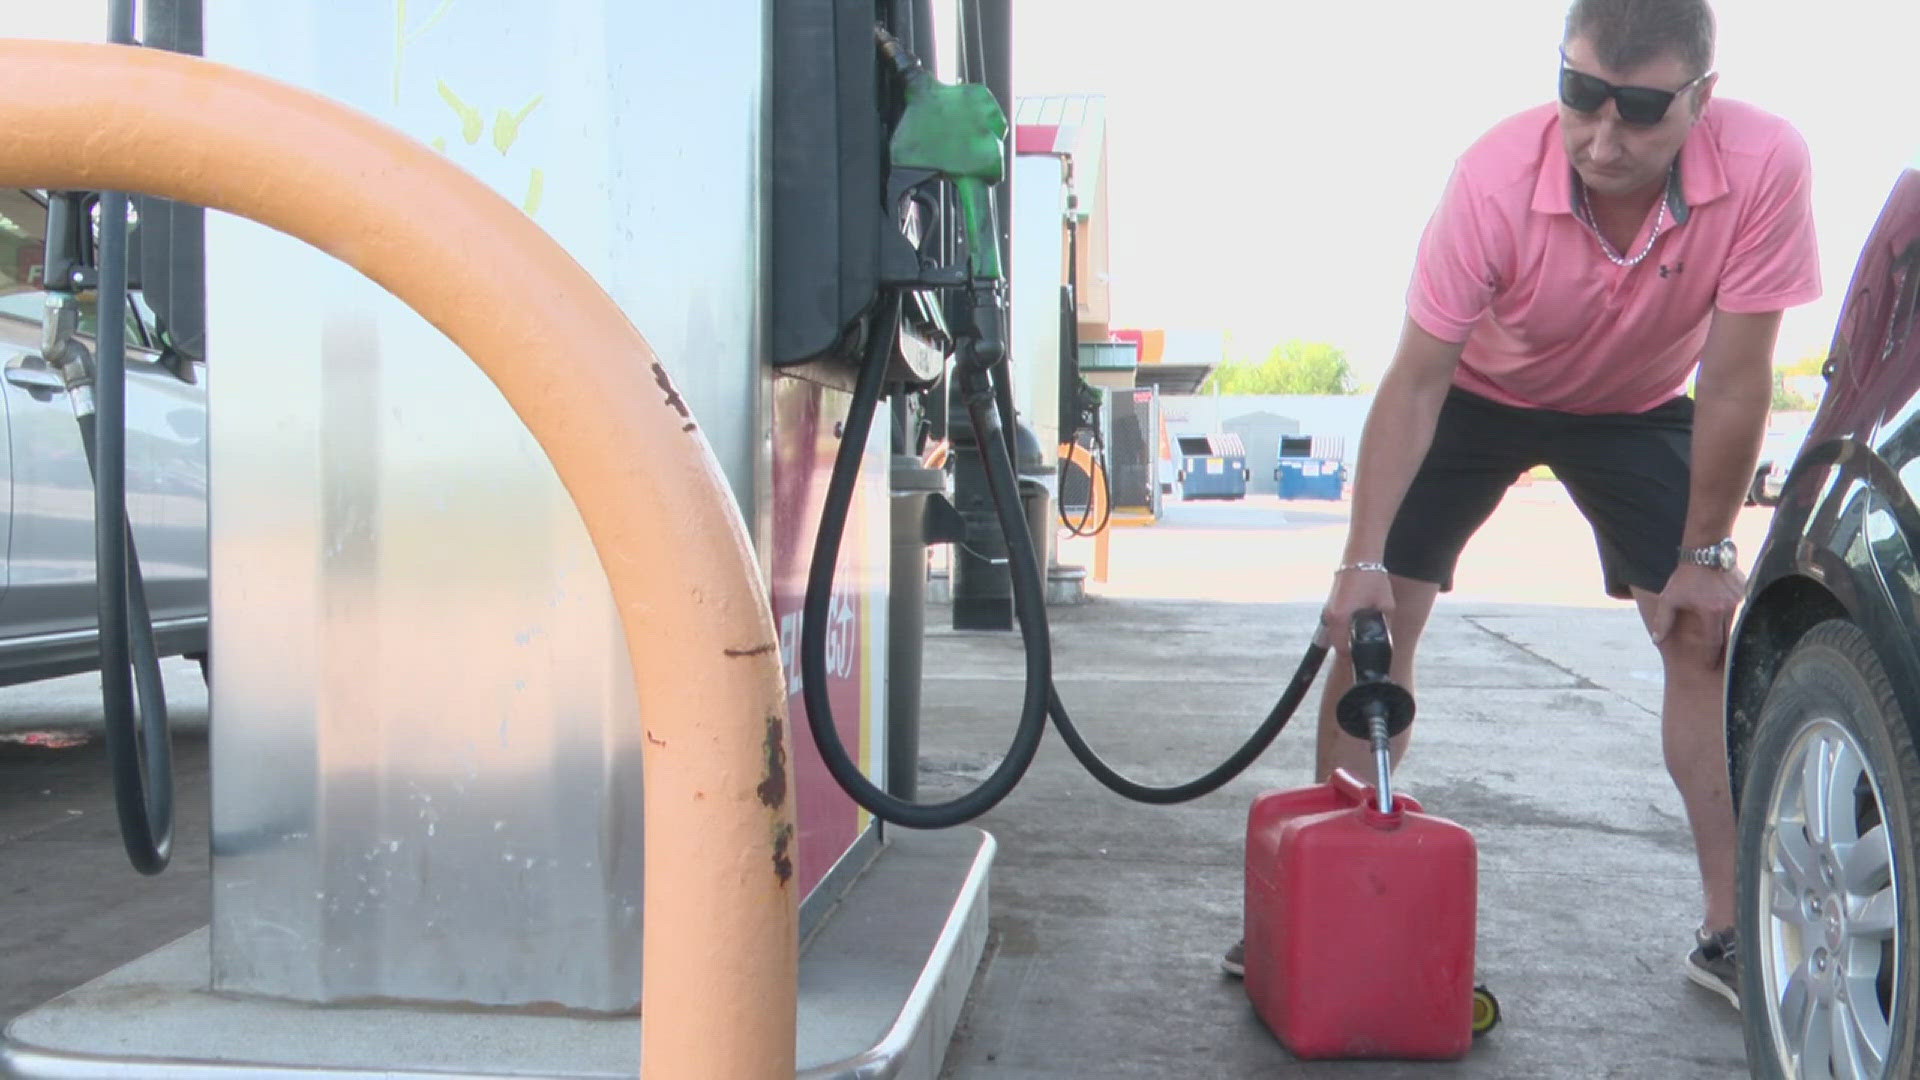 The gas tax in Illinois now sits at 47 cents per gallon, roughly a cent-and-a-half increase. It's now the second-highest state gas tax in the country.